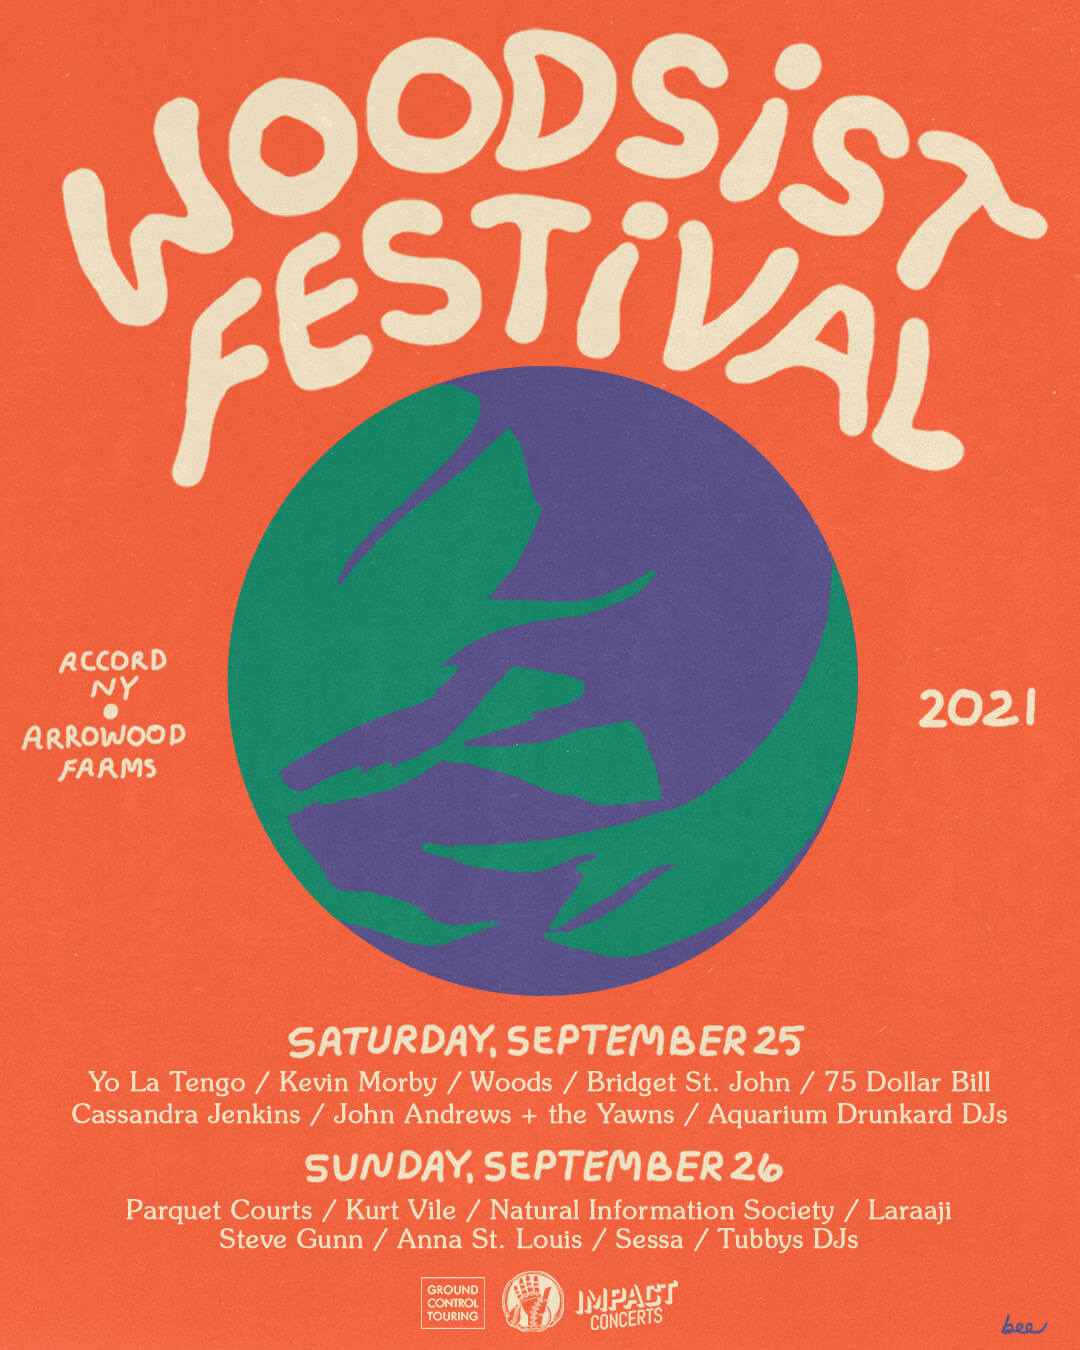 Woodsist has announced an expanded 2021 edition of the WOODSIST FESTIVAL, r